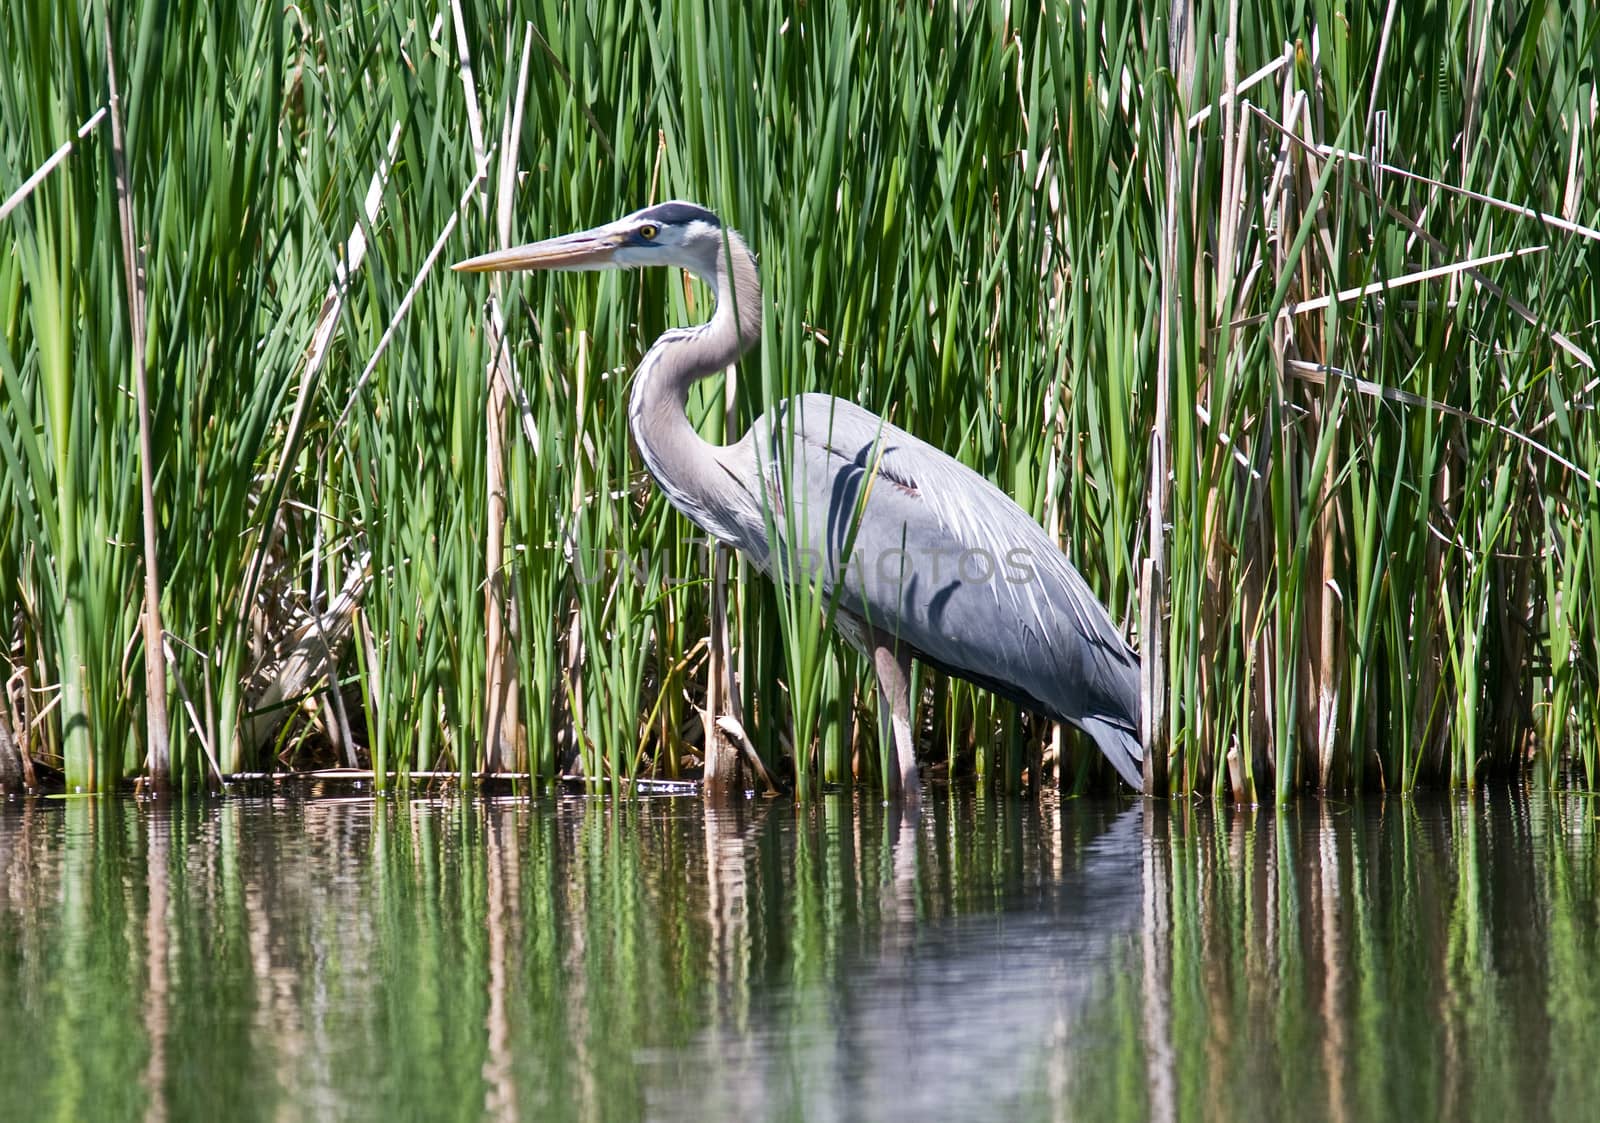 A blue heron standing in water next to some tall grass